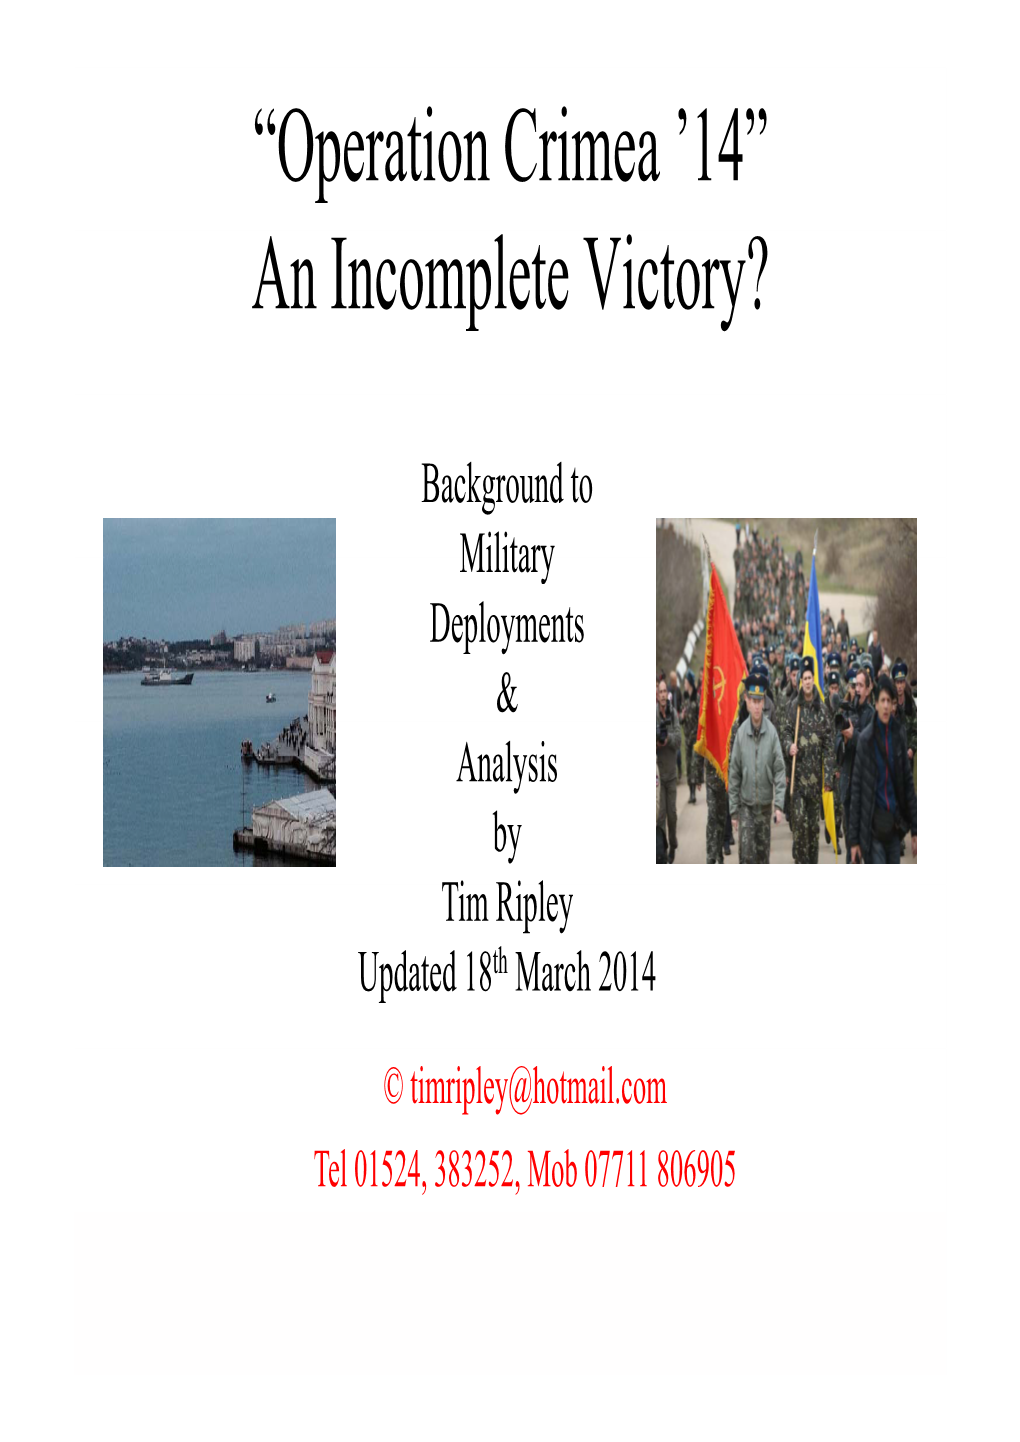 “Operation Crimea '14” an Incomplete Victory?